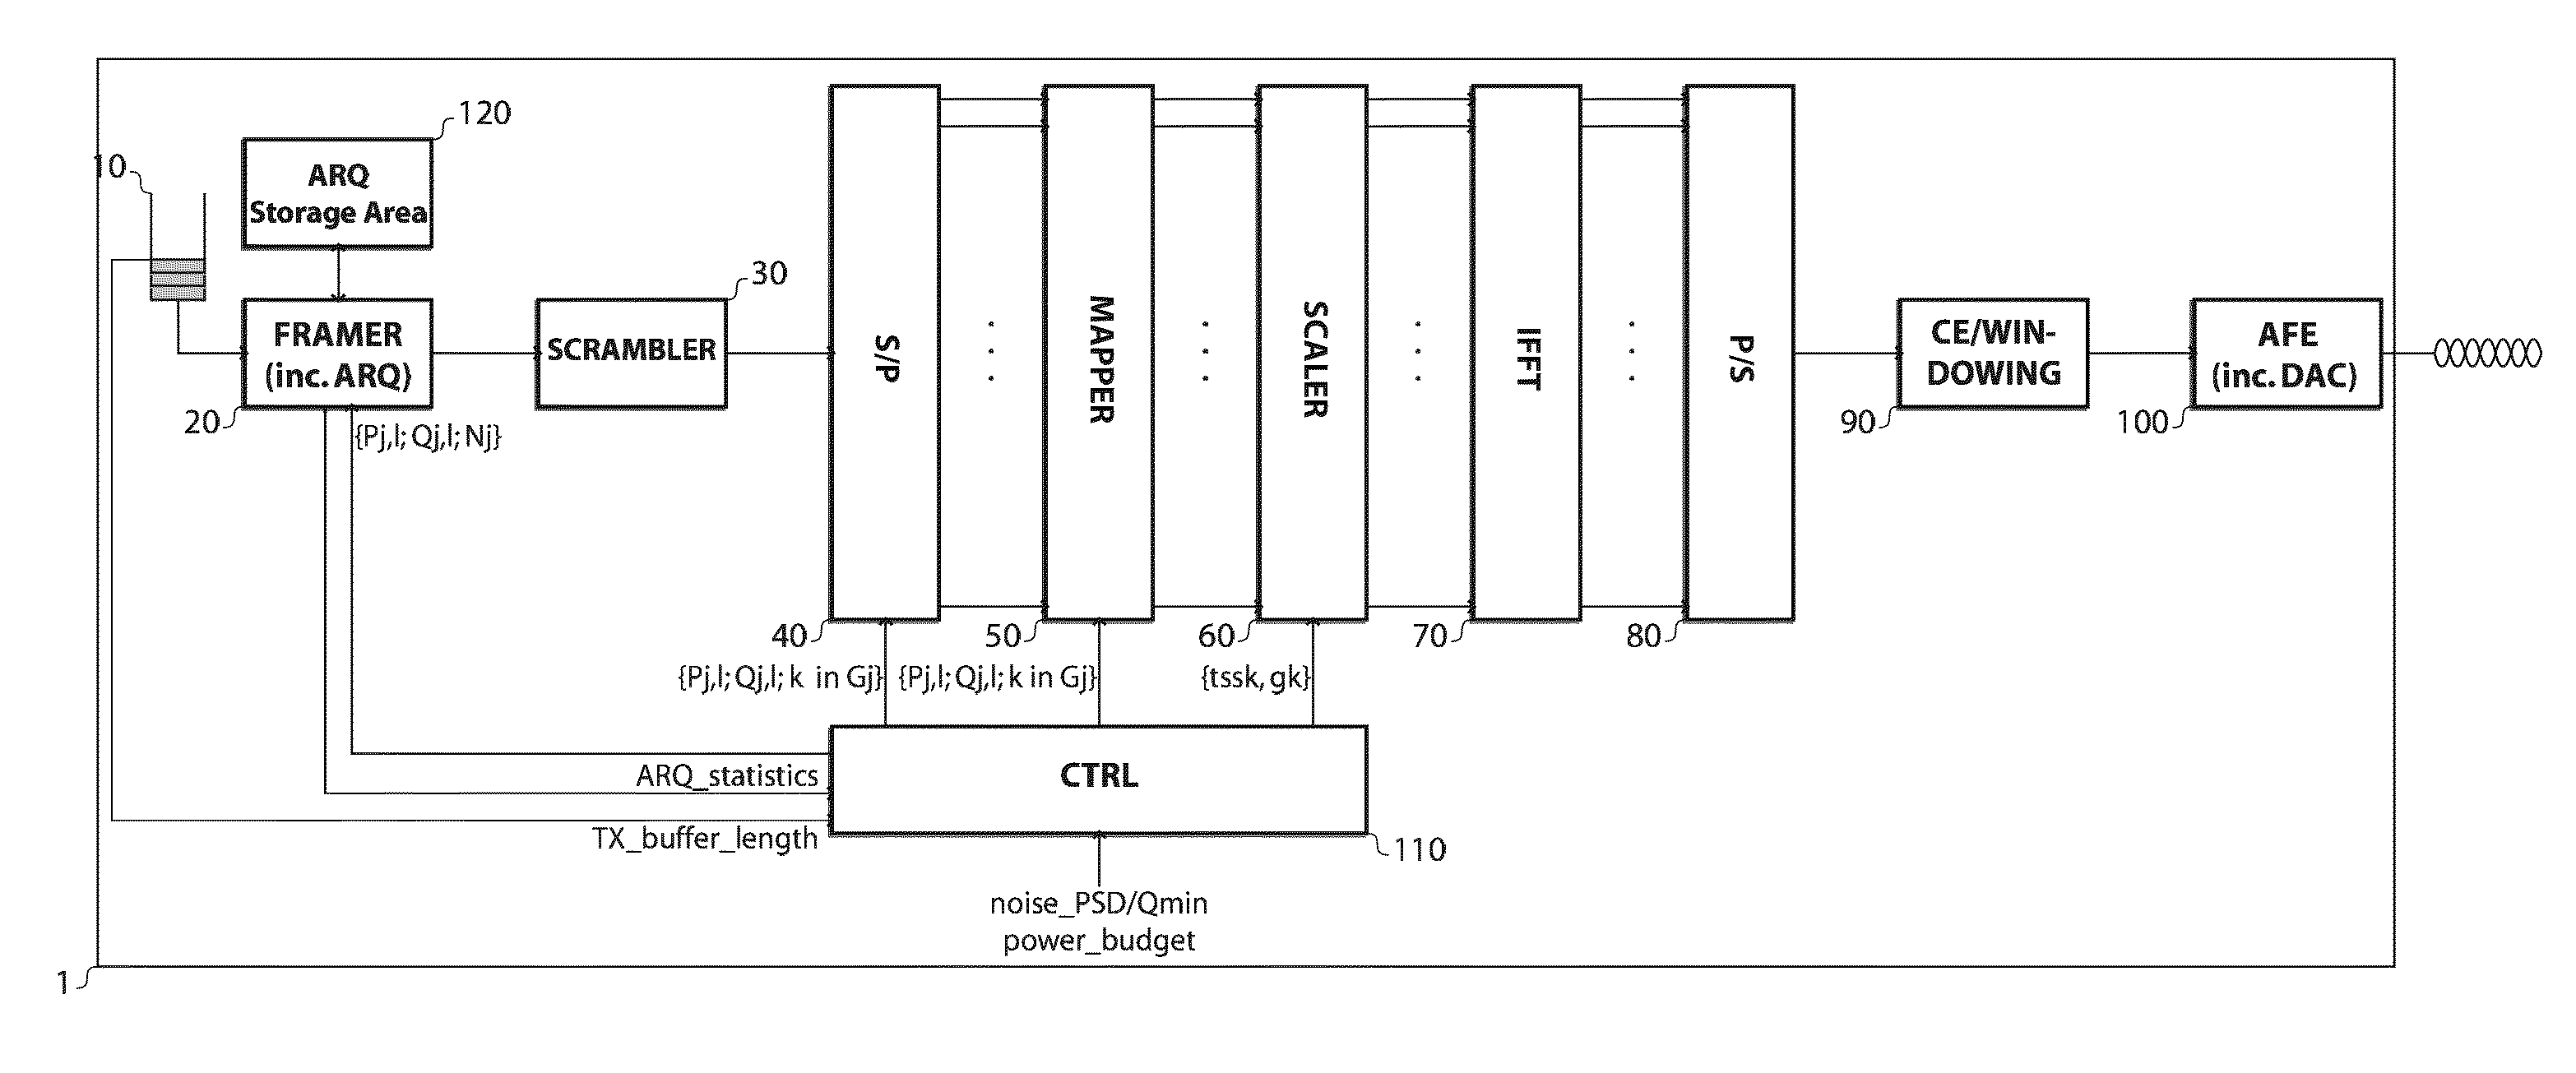 Hierarchical and adaptive multi-carrier digital modulation and demodulation